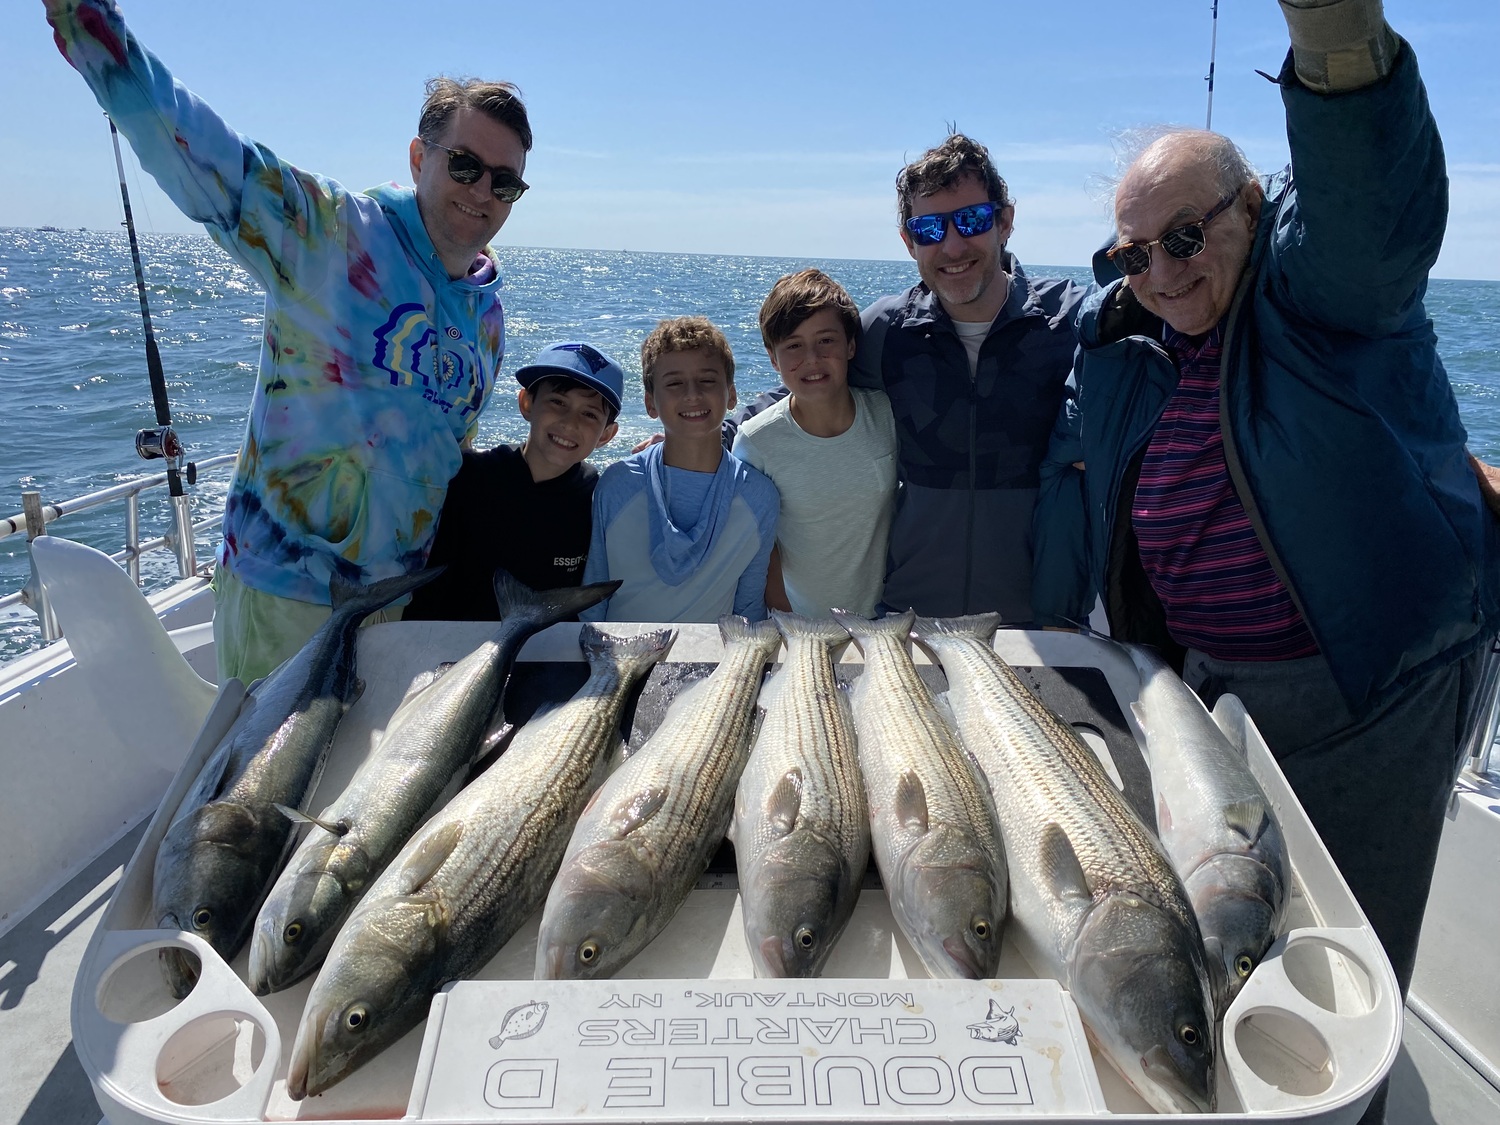 Catching a limit of striped bass like these lucky customers aboard the charter boat Double D did last summer will be even more difficult in 2024 since more stripers will have grown out of the 28-31-inch keeper size. CAPT. DAN GIUNTA